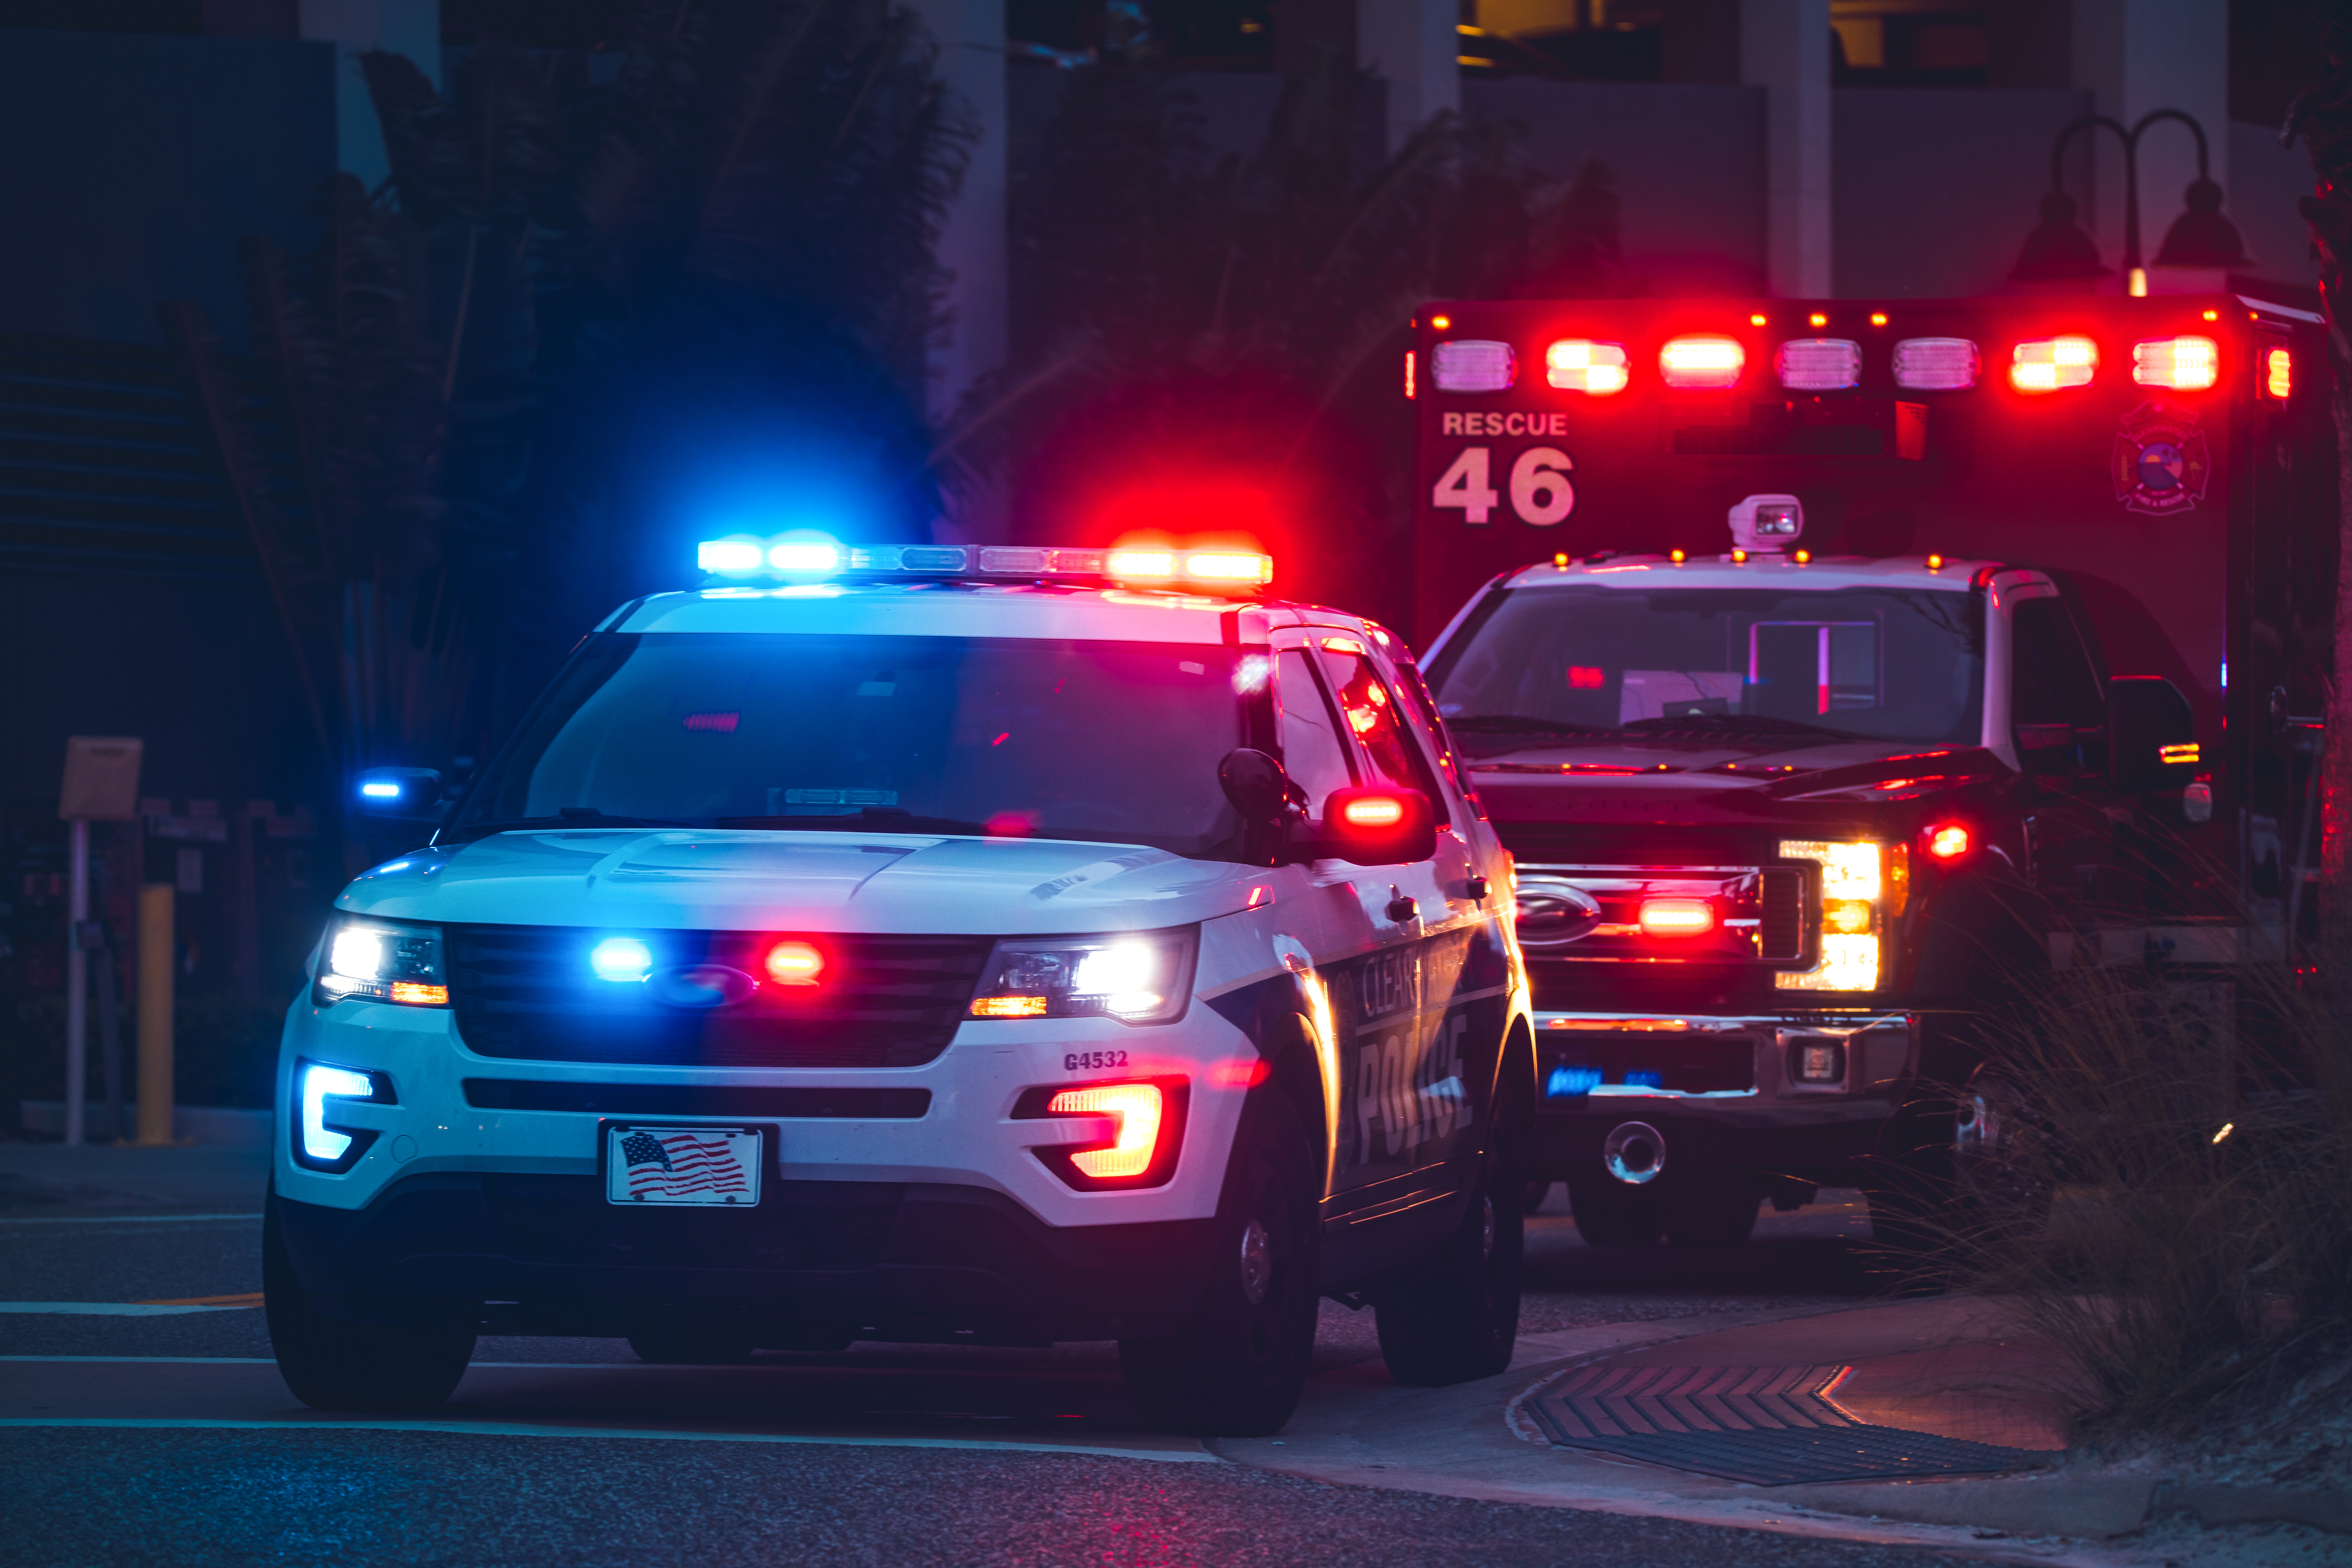 American Police Car and Emergency truck with Blue and red lights| Source: Shutterstock.com